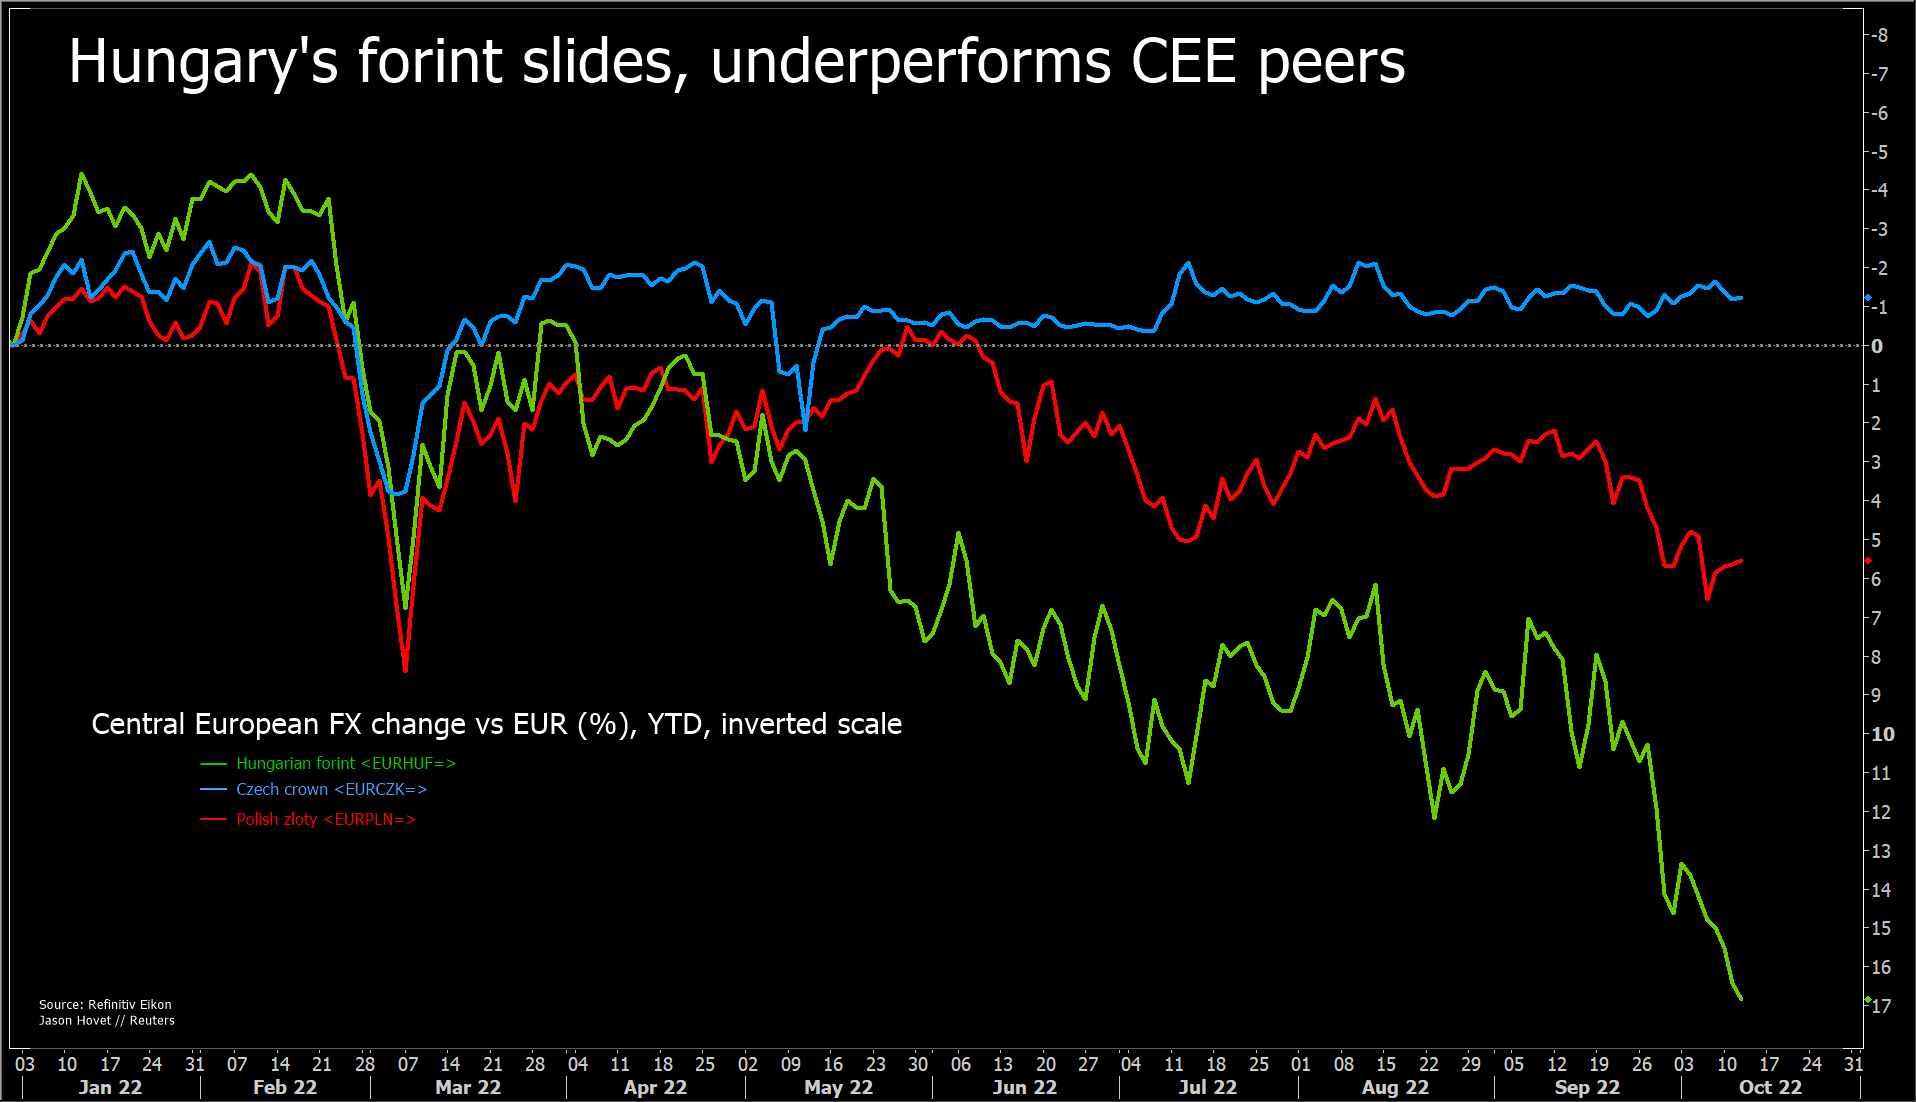 The forint has sharply underperformed peers in CEE